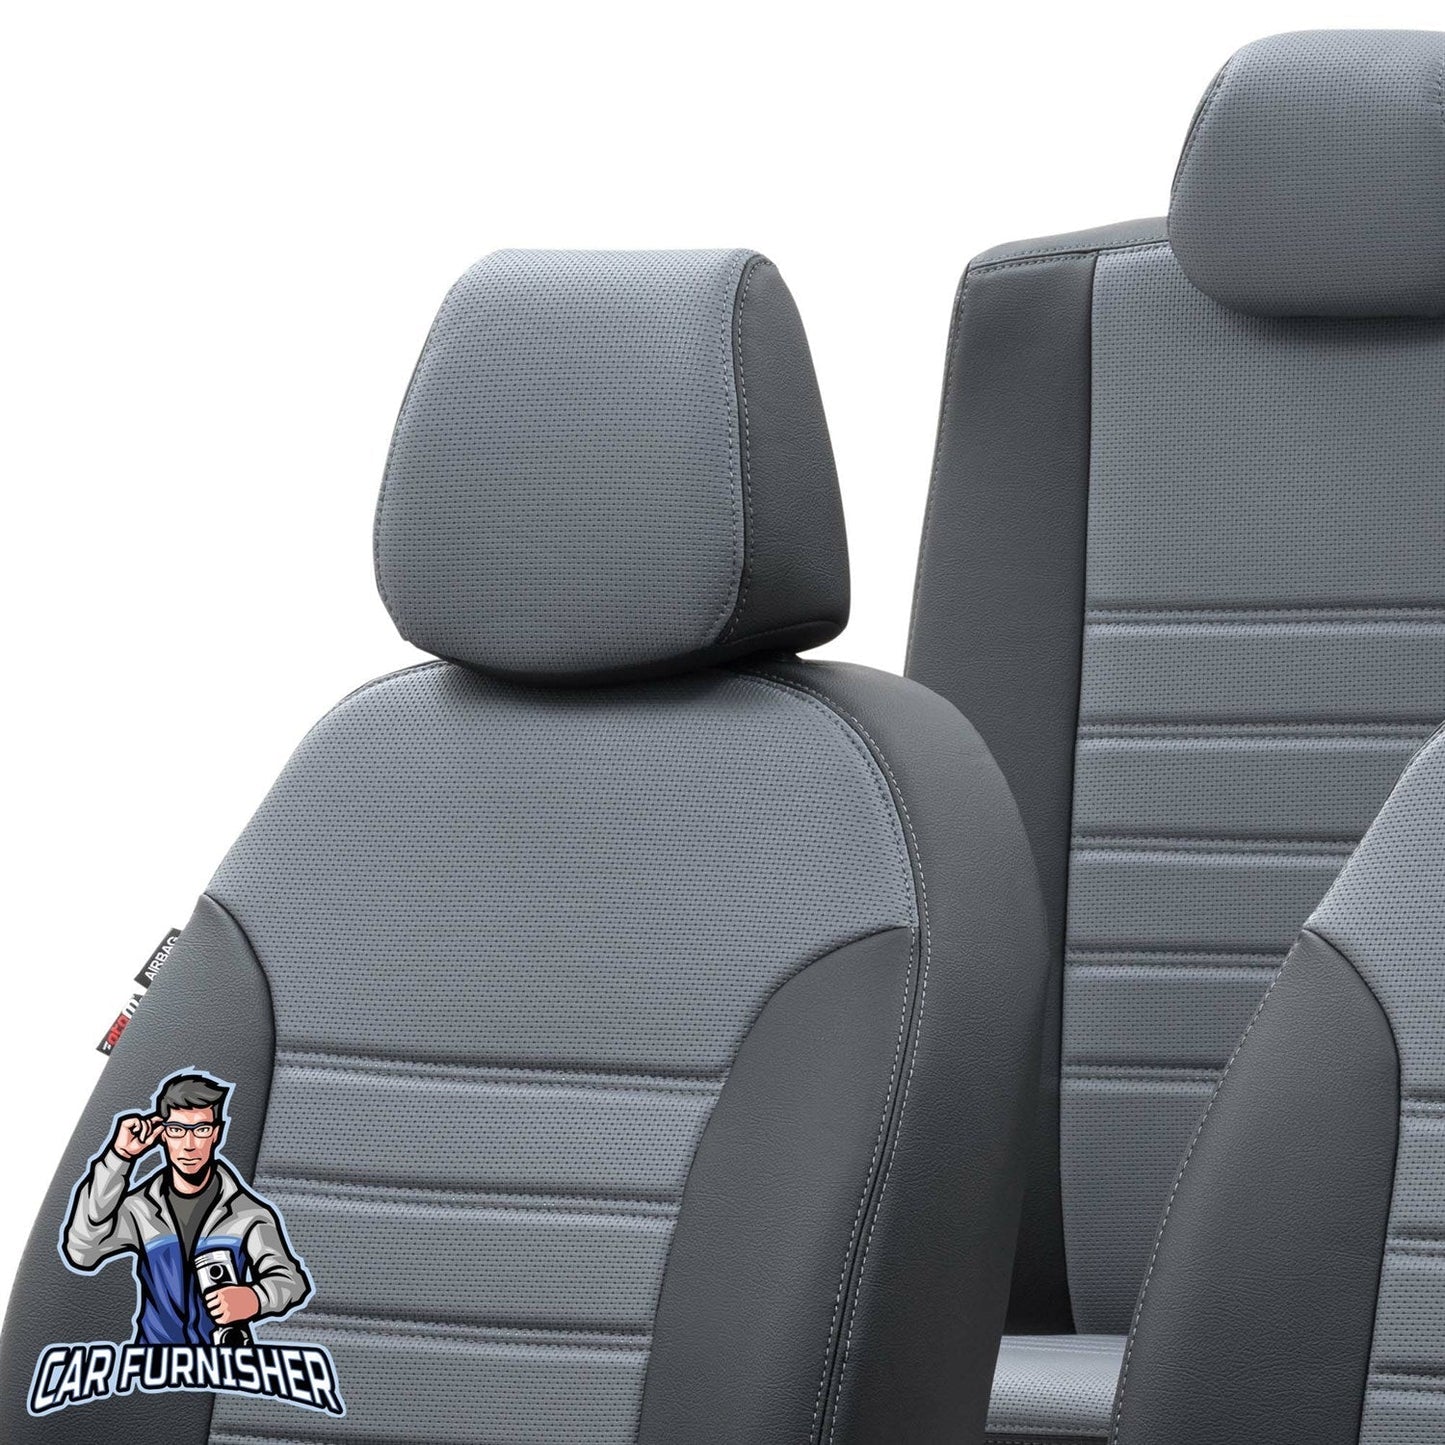 Geely Emgrand Seat Covers New York Leather Design Smoked Black Leather